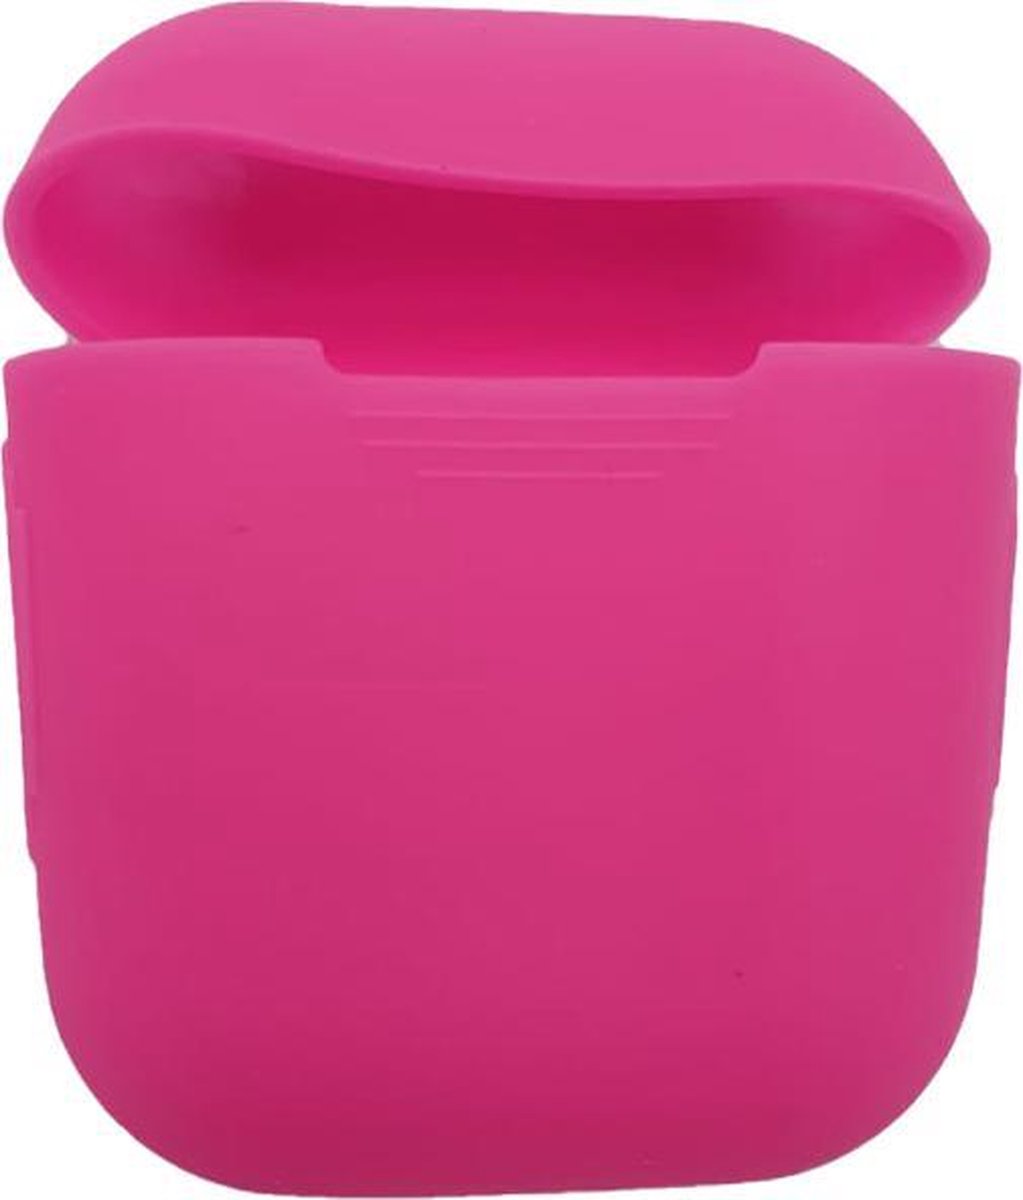 Airpod Case – Airpod Hoesje – Voor Airpods 1&2 - Silicone Roze – oDaani